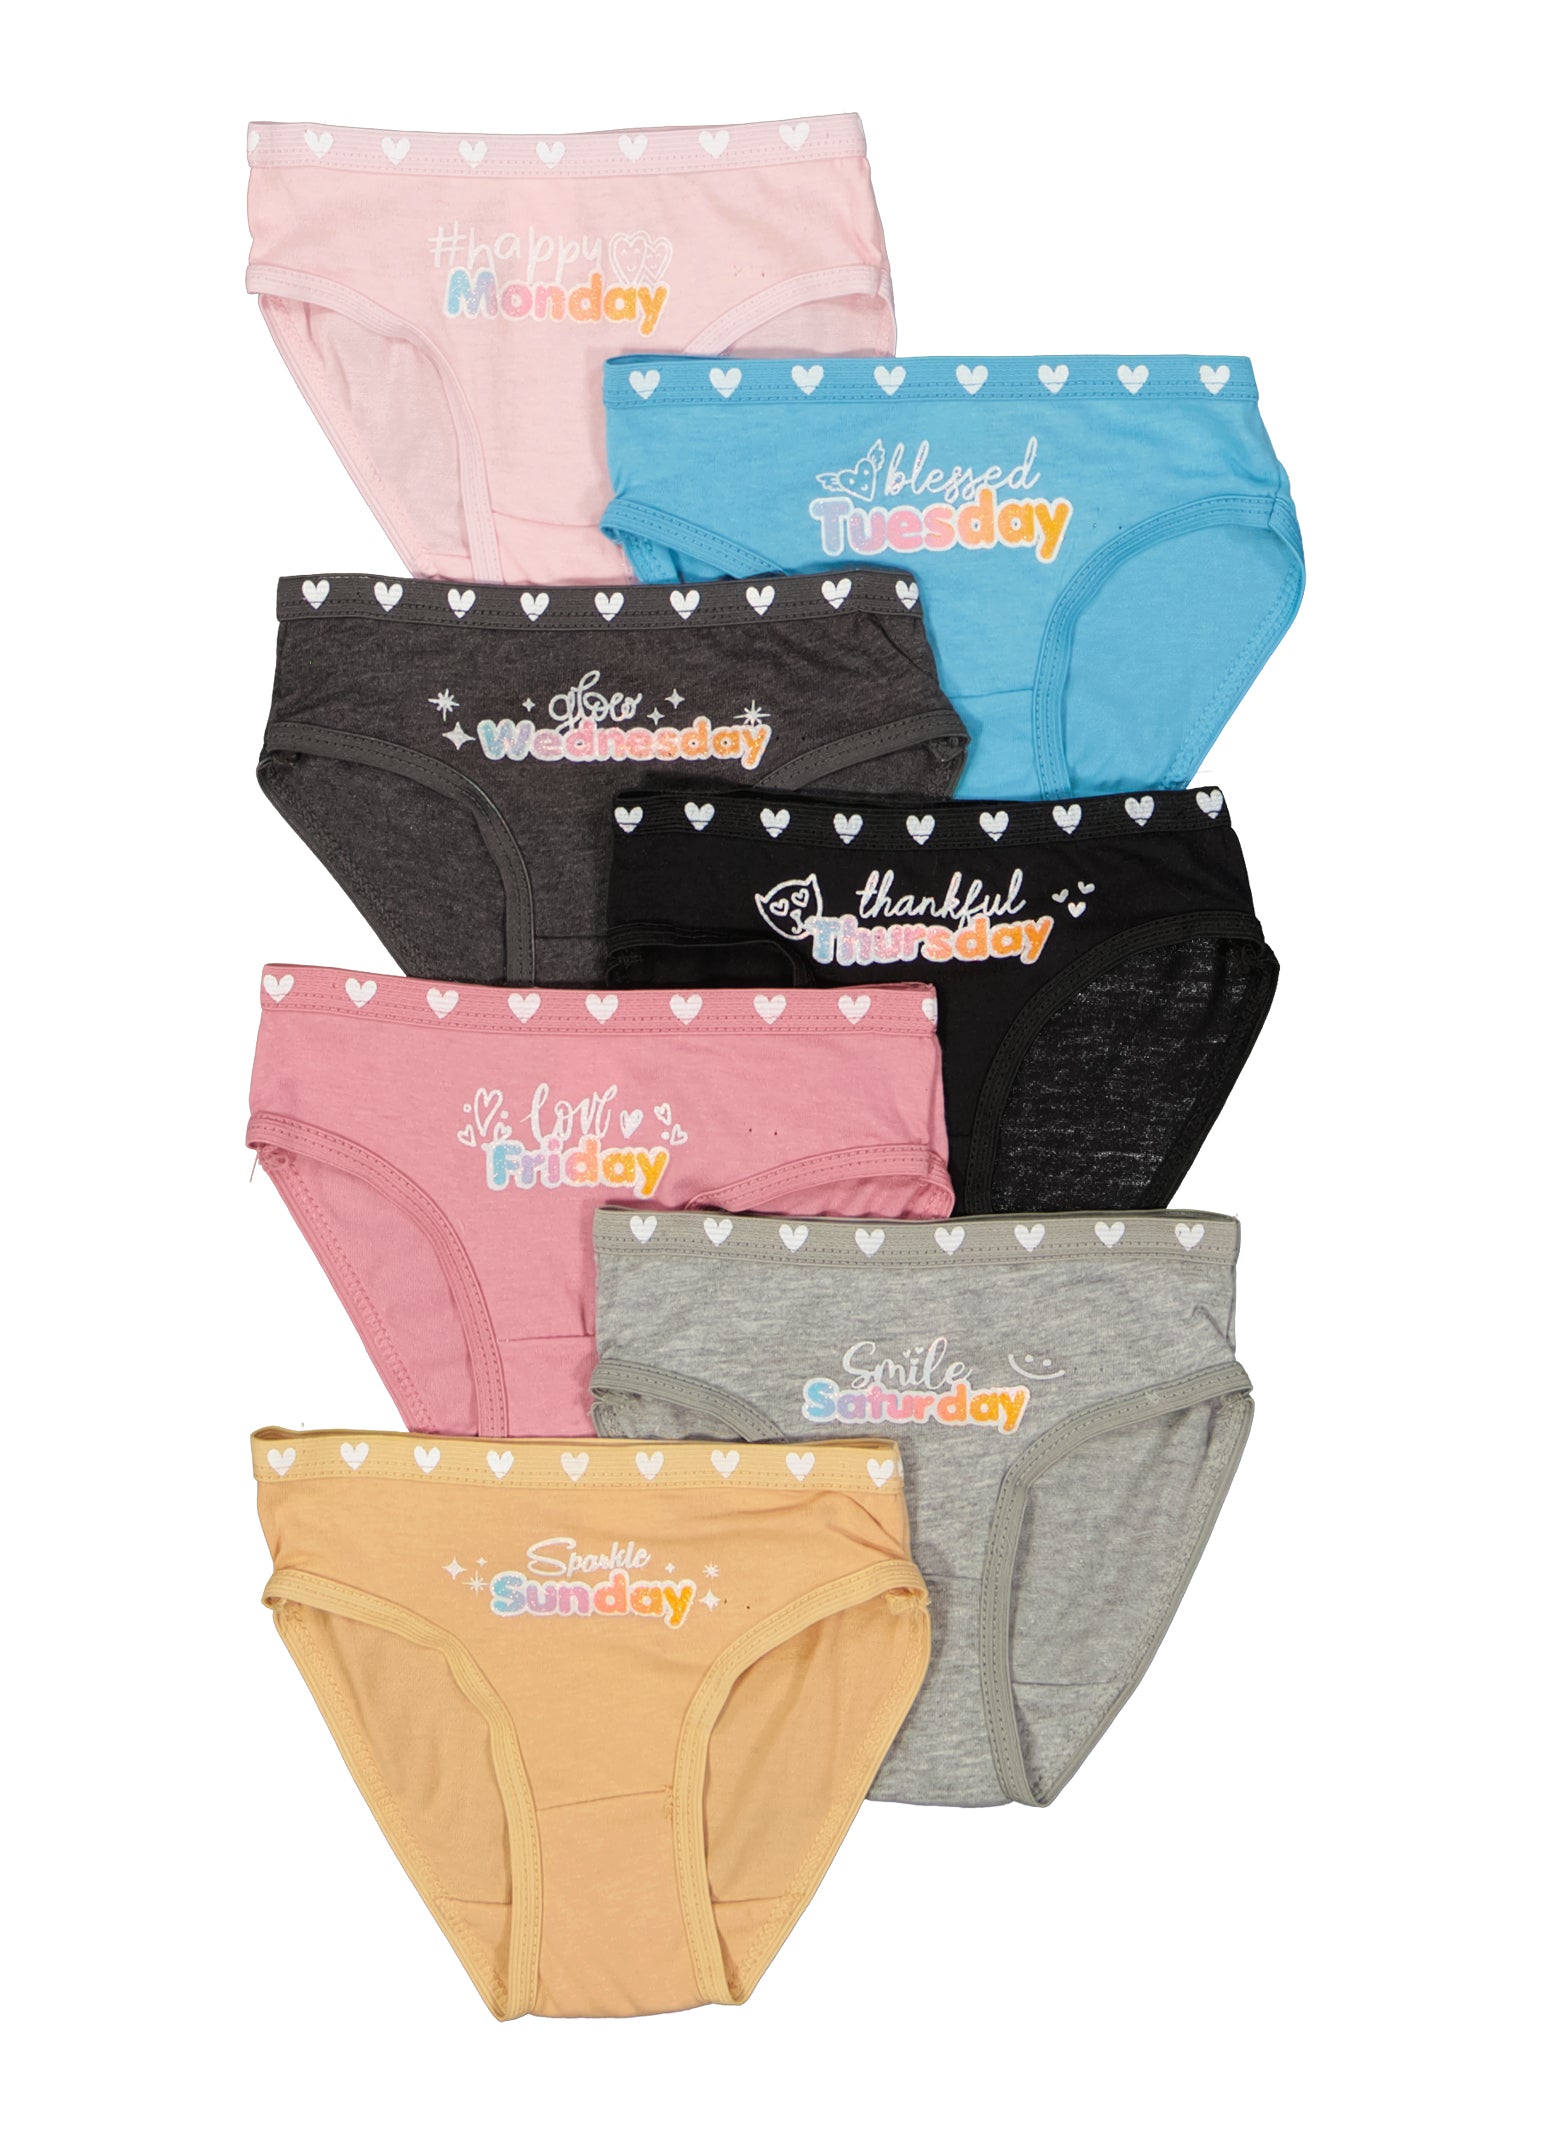 Little Girls Graphic Days of the Week Panties - Multi Color